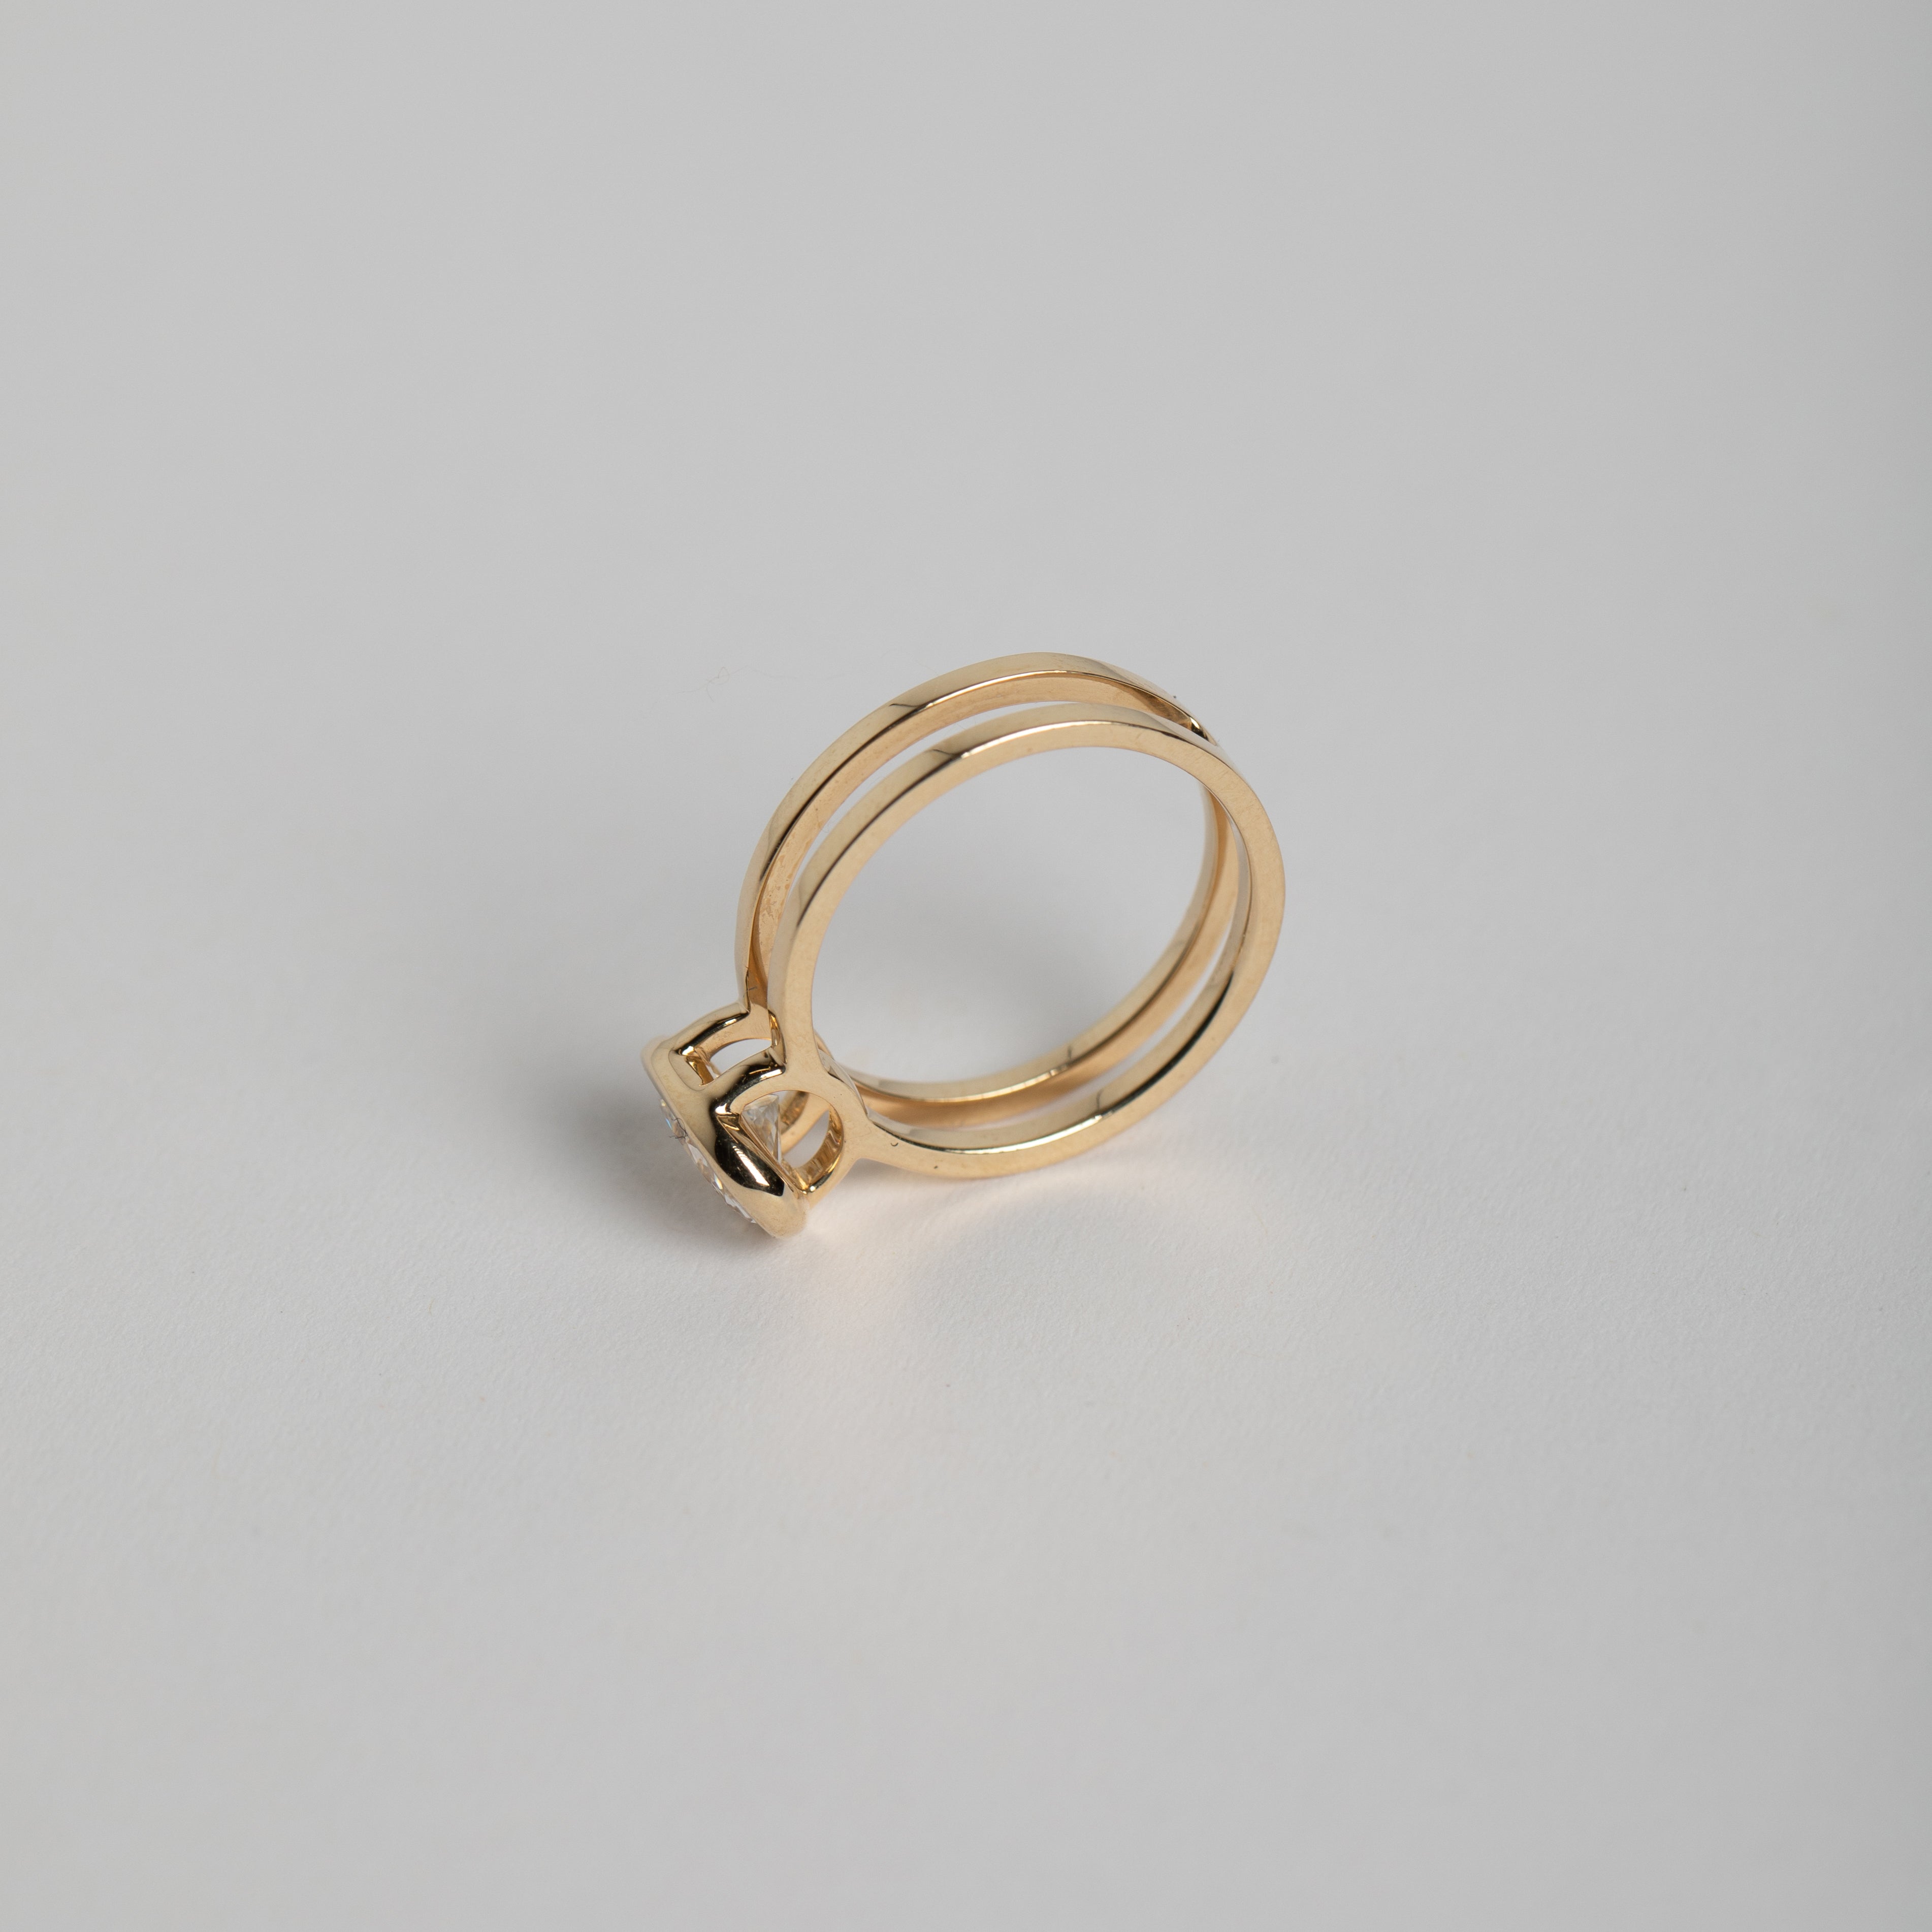 Handmade Benu Ring in 14k gold set with a G VS1 1.17ct lab-created diamond ethical made in NYC by SHW fine Jewelry